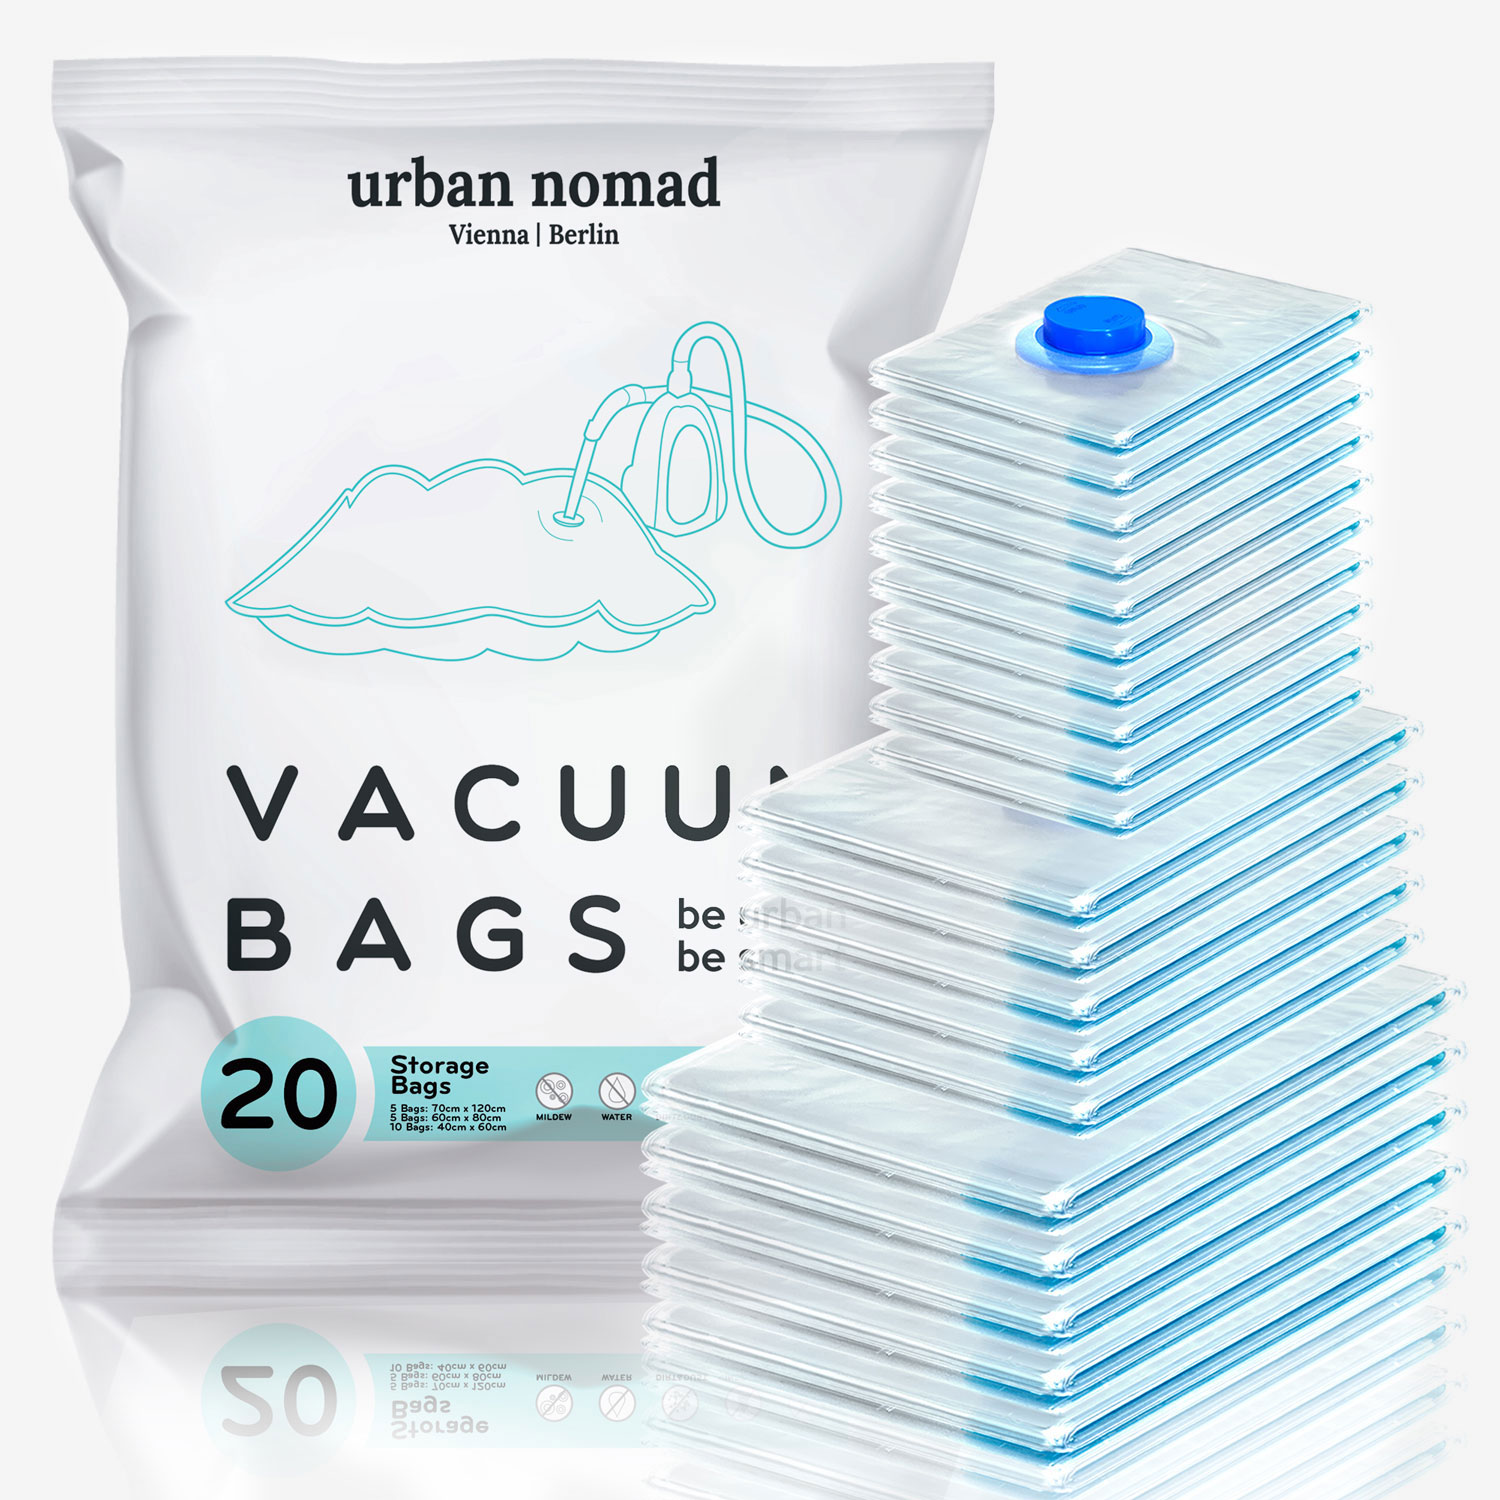 Vacuum Storage Bags for Travel, 20 Pack Compression Bags with Hand Pump